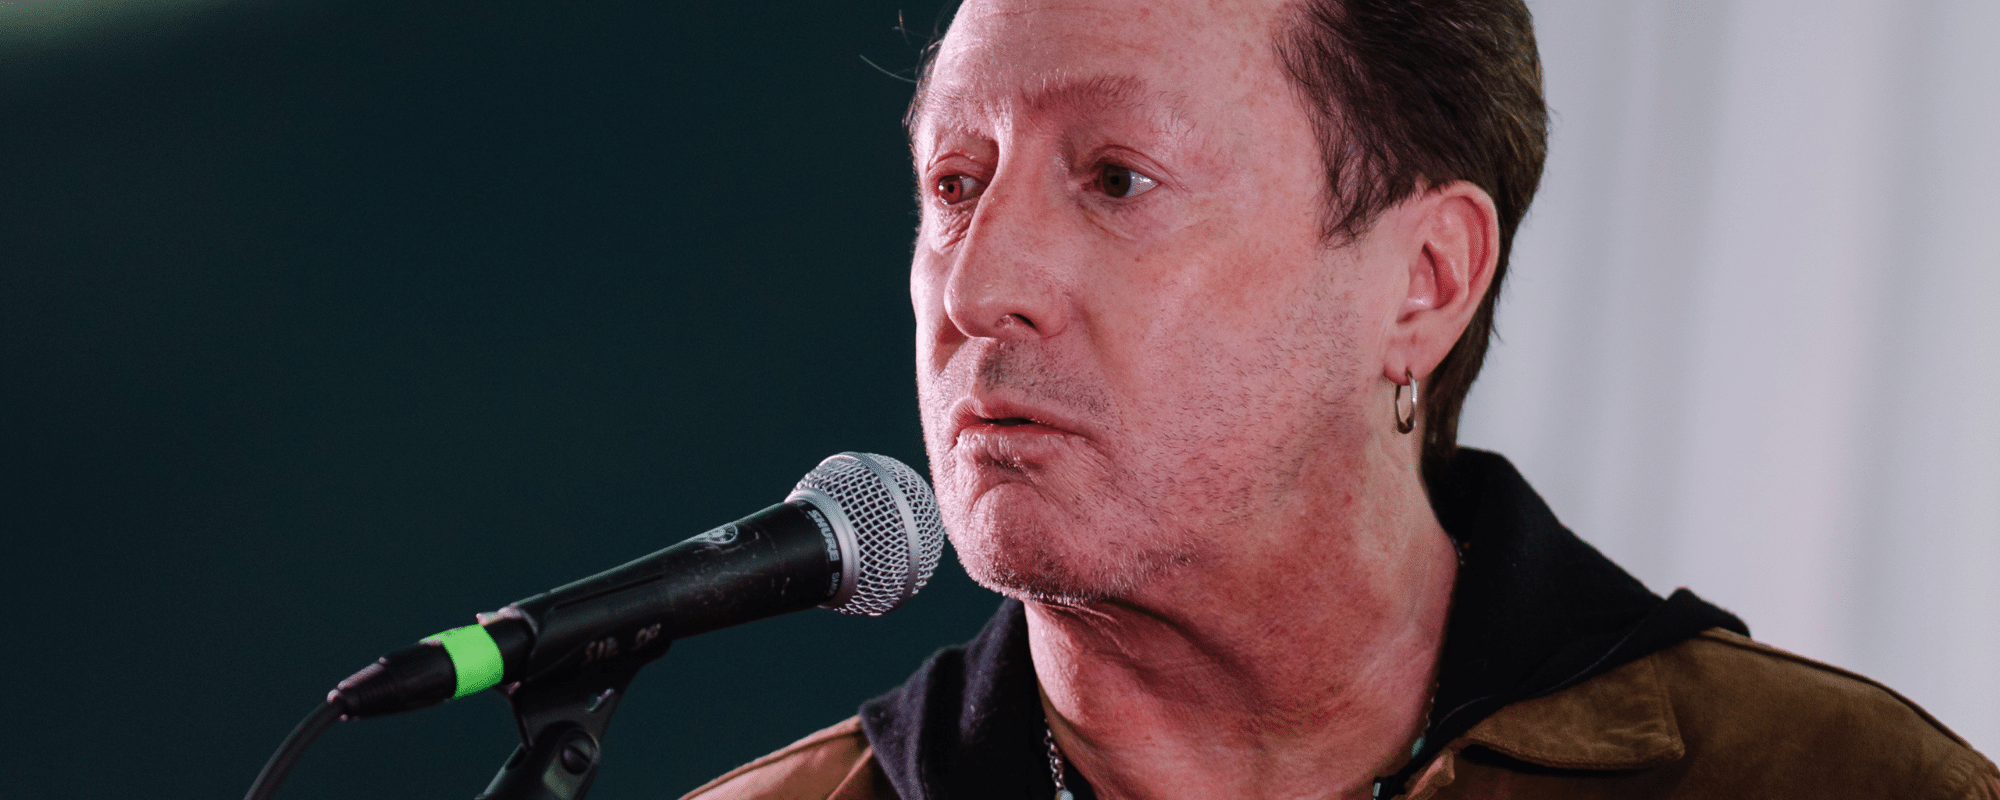 Julian Lennon at Live in the Vineyard: “I Know Who I Am Now”